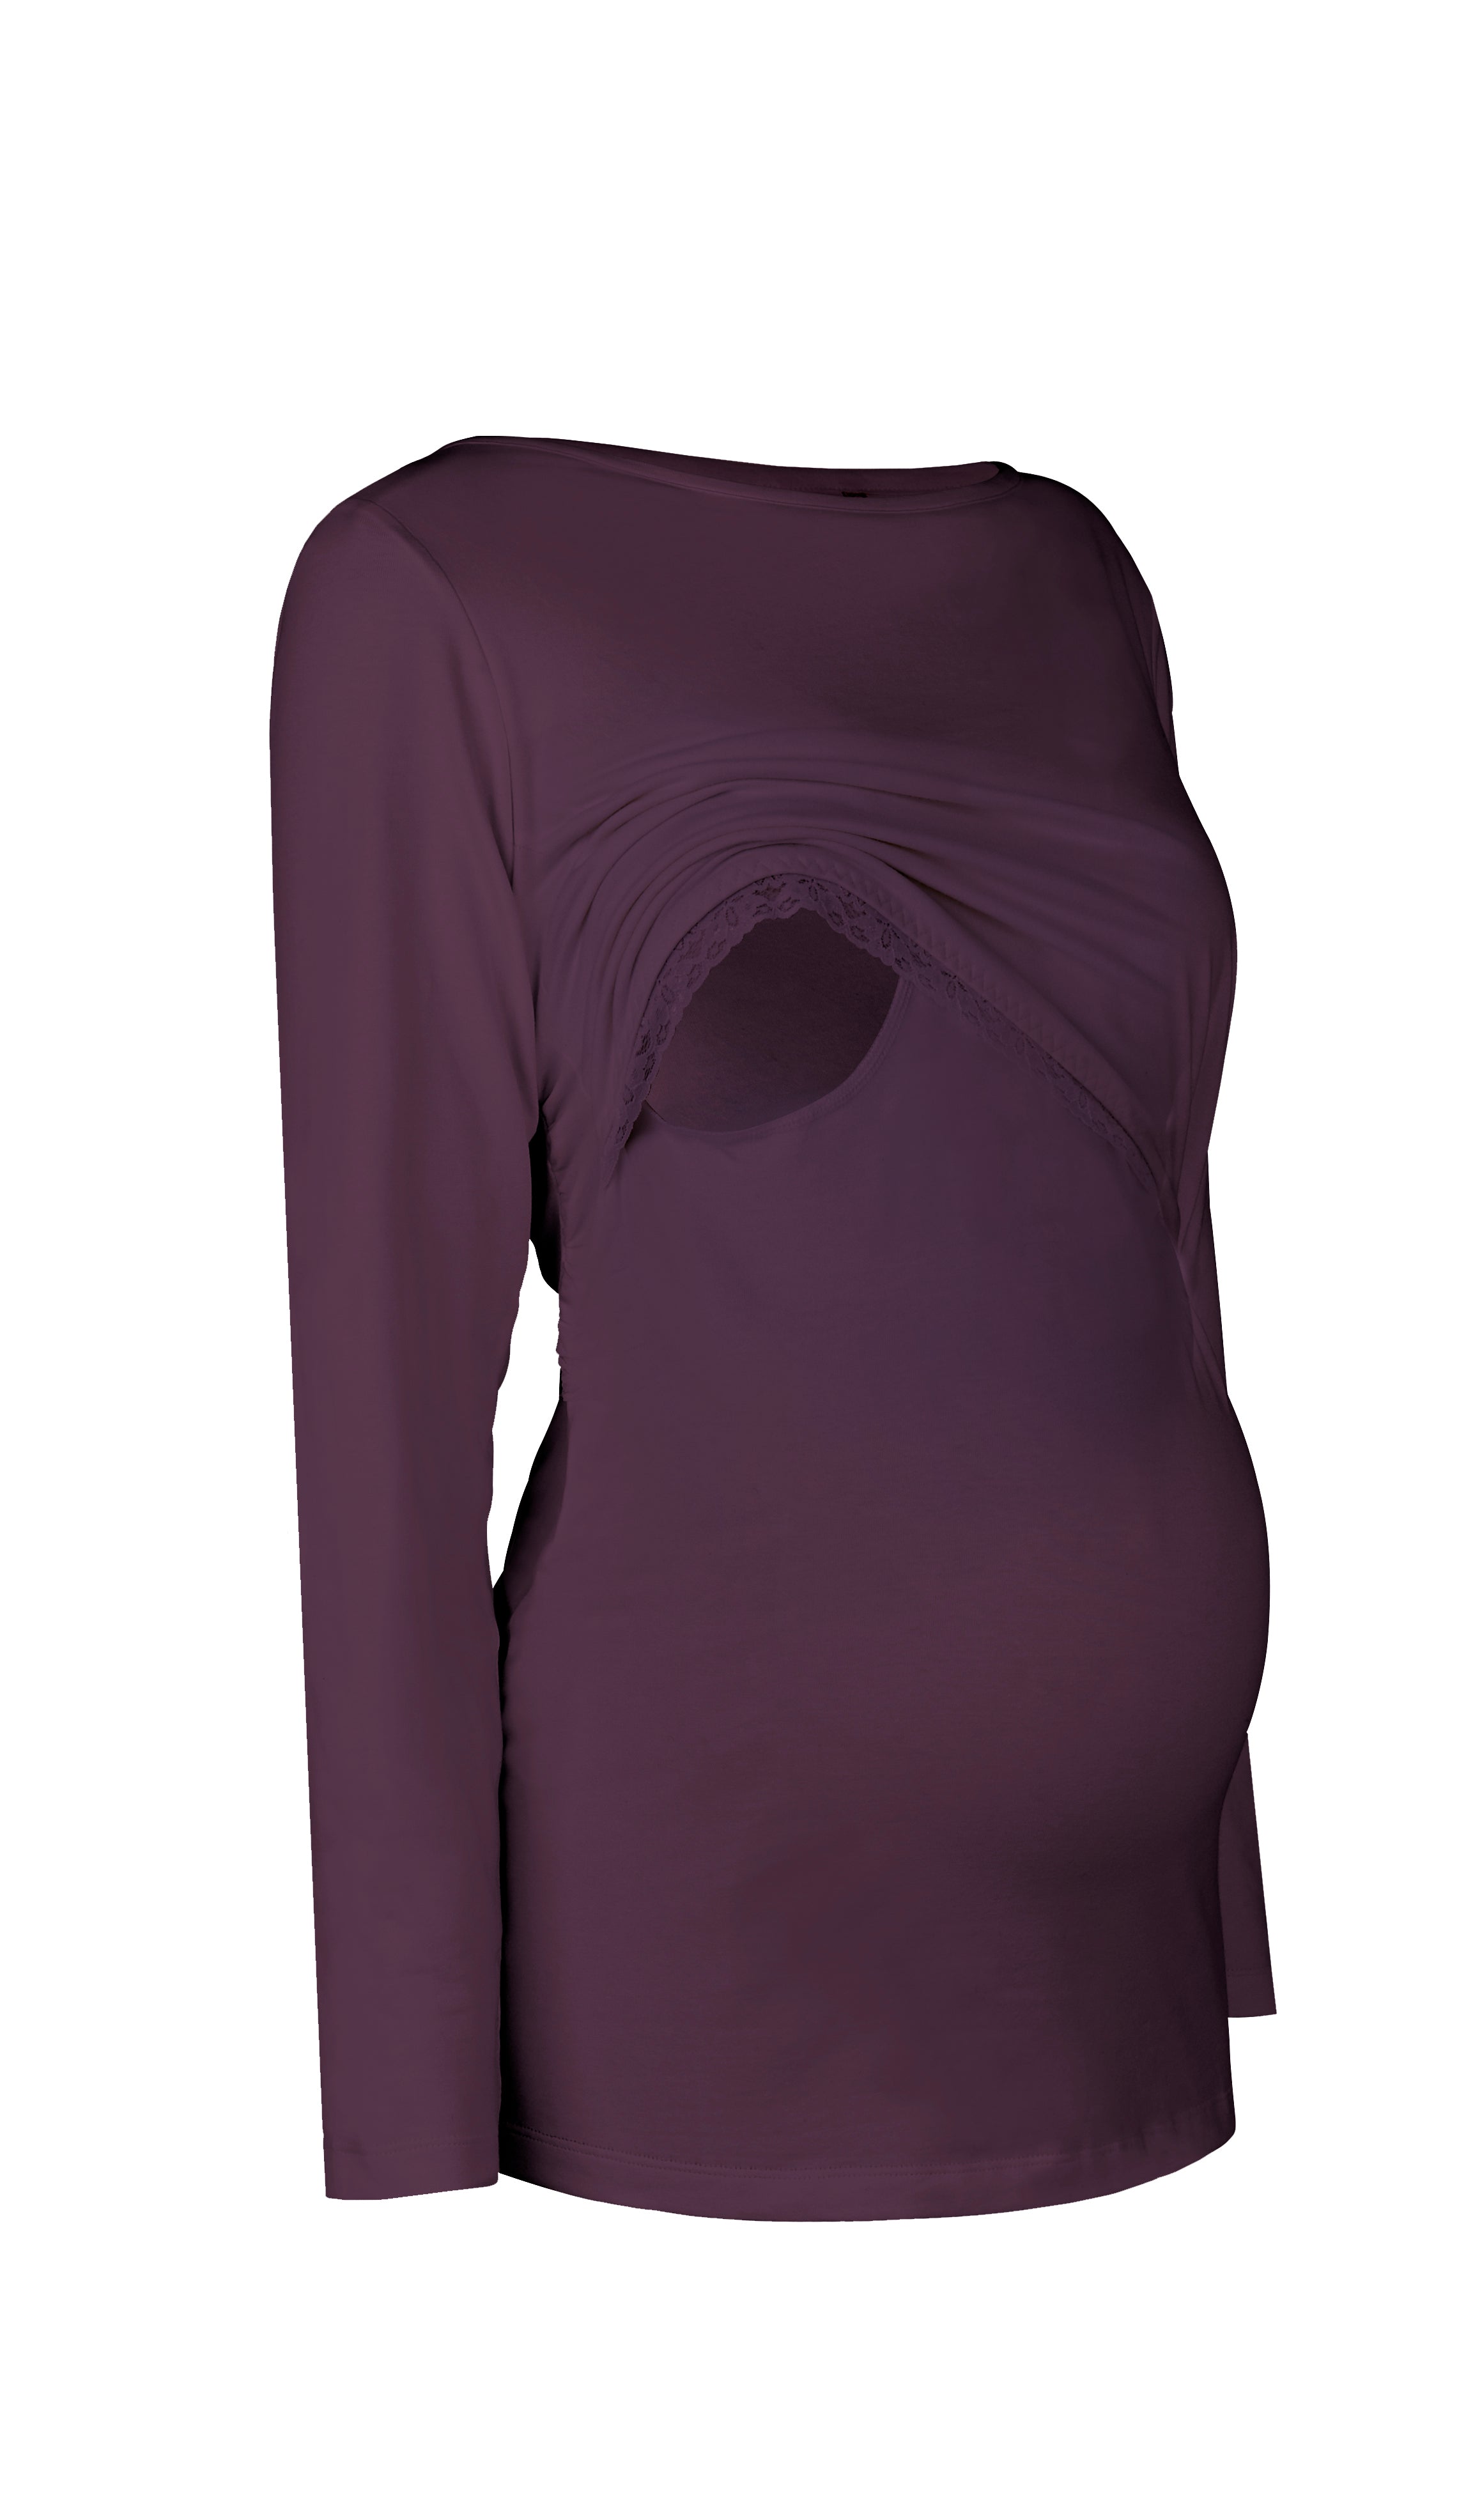 Bshirt Nursing long sleeve t-shirt (with lace) in Plum